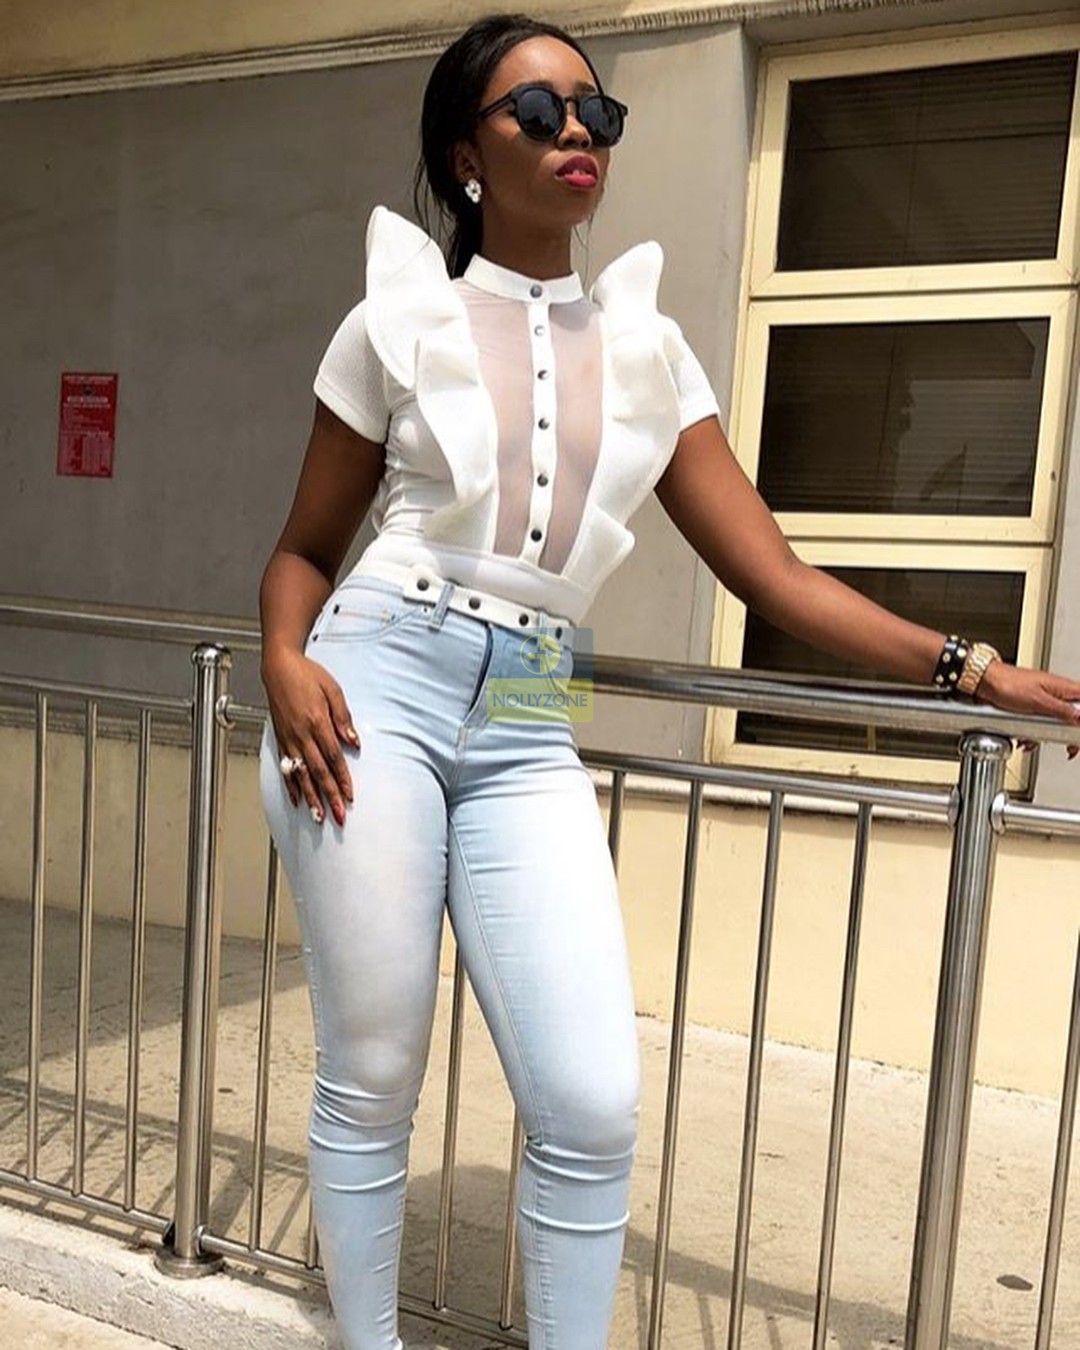 BBnaija: Braless! See the B00bs Revealing Outfit Bambam Rocked Today ...